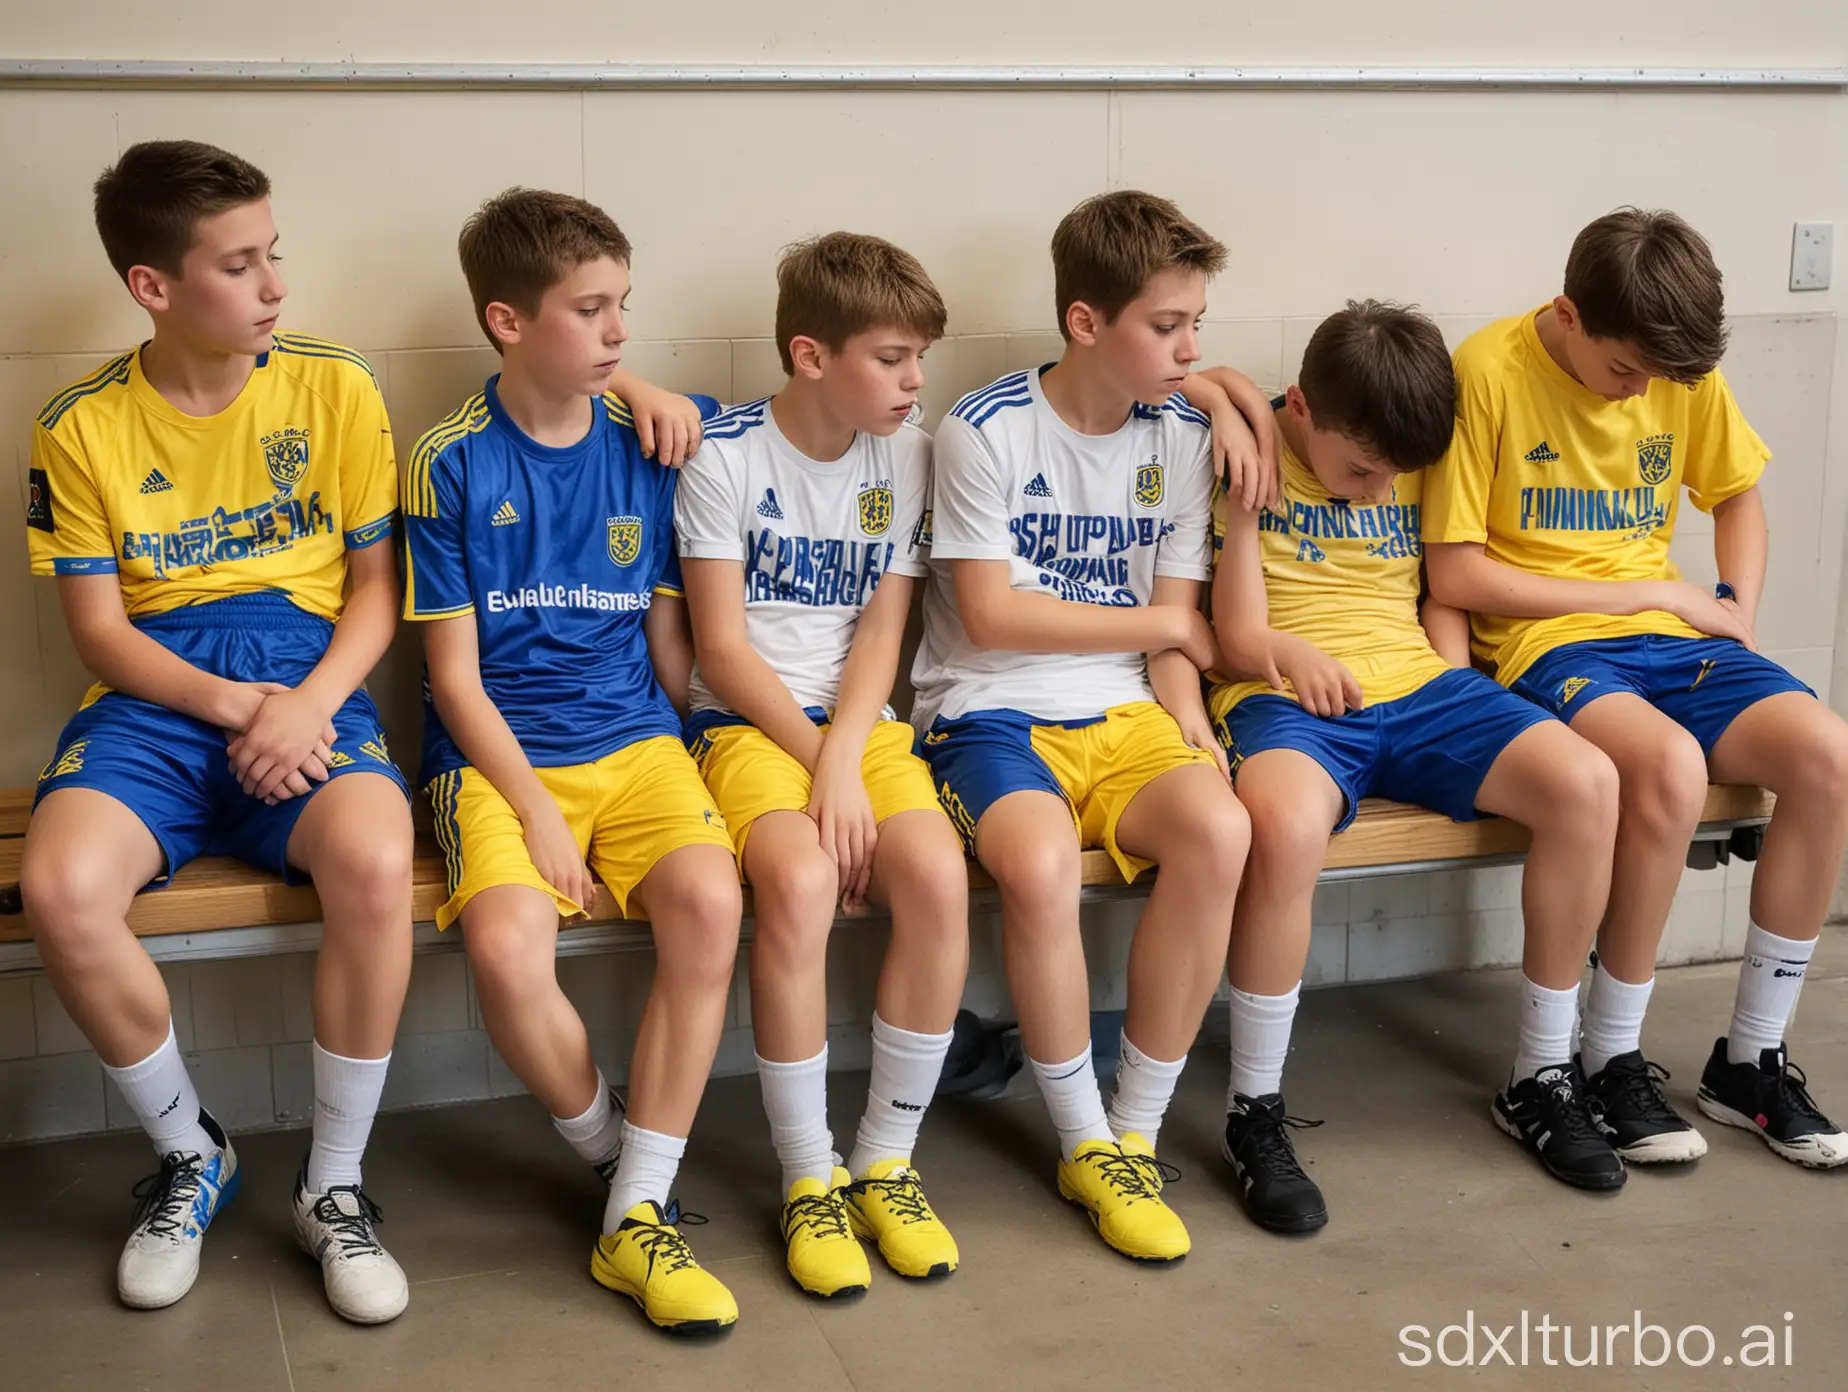 Four-Tired-13YearOld-Boys-Napping-on-a-Soccer-Changing-Room-Bench